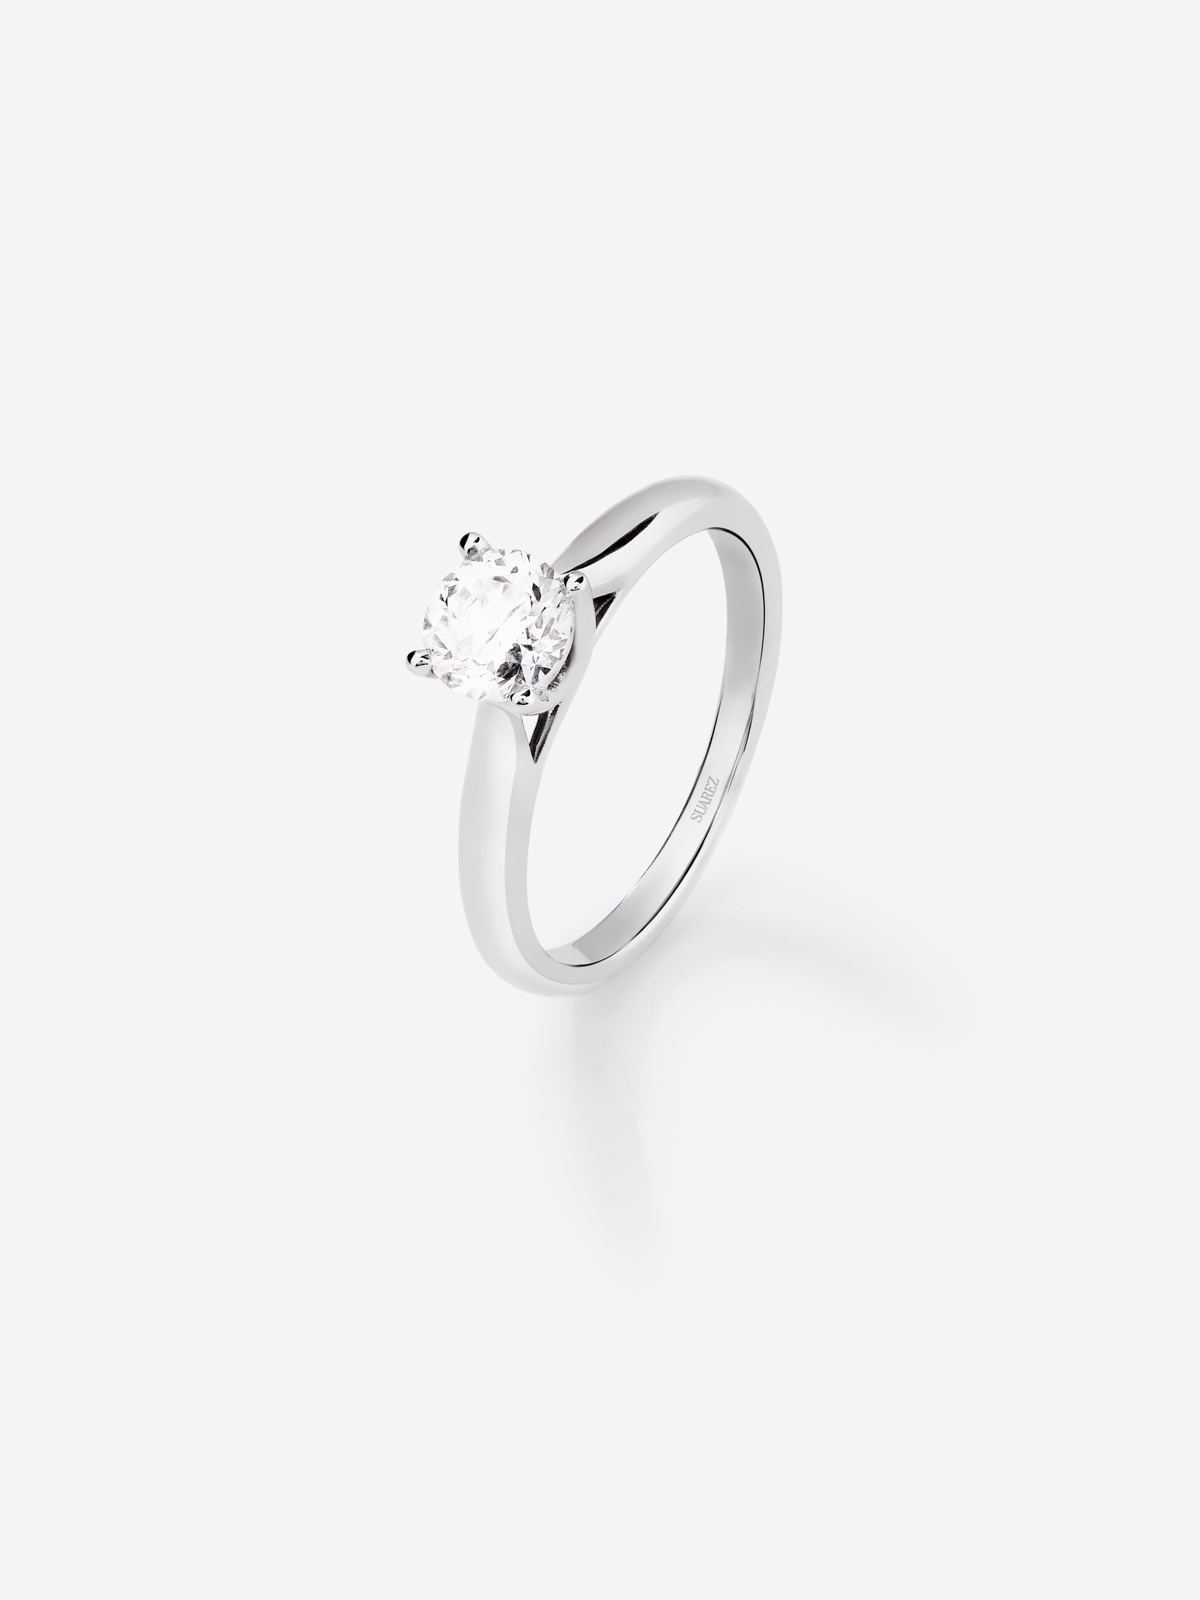 18K White Gold Engagement Solitaire with 0.50 Carat Center Diamond